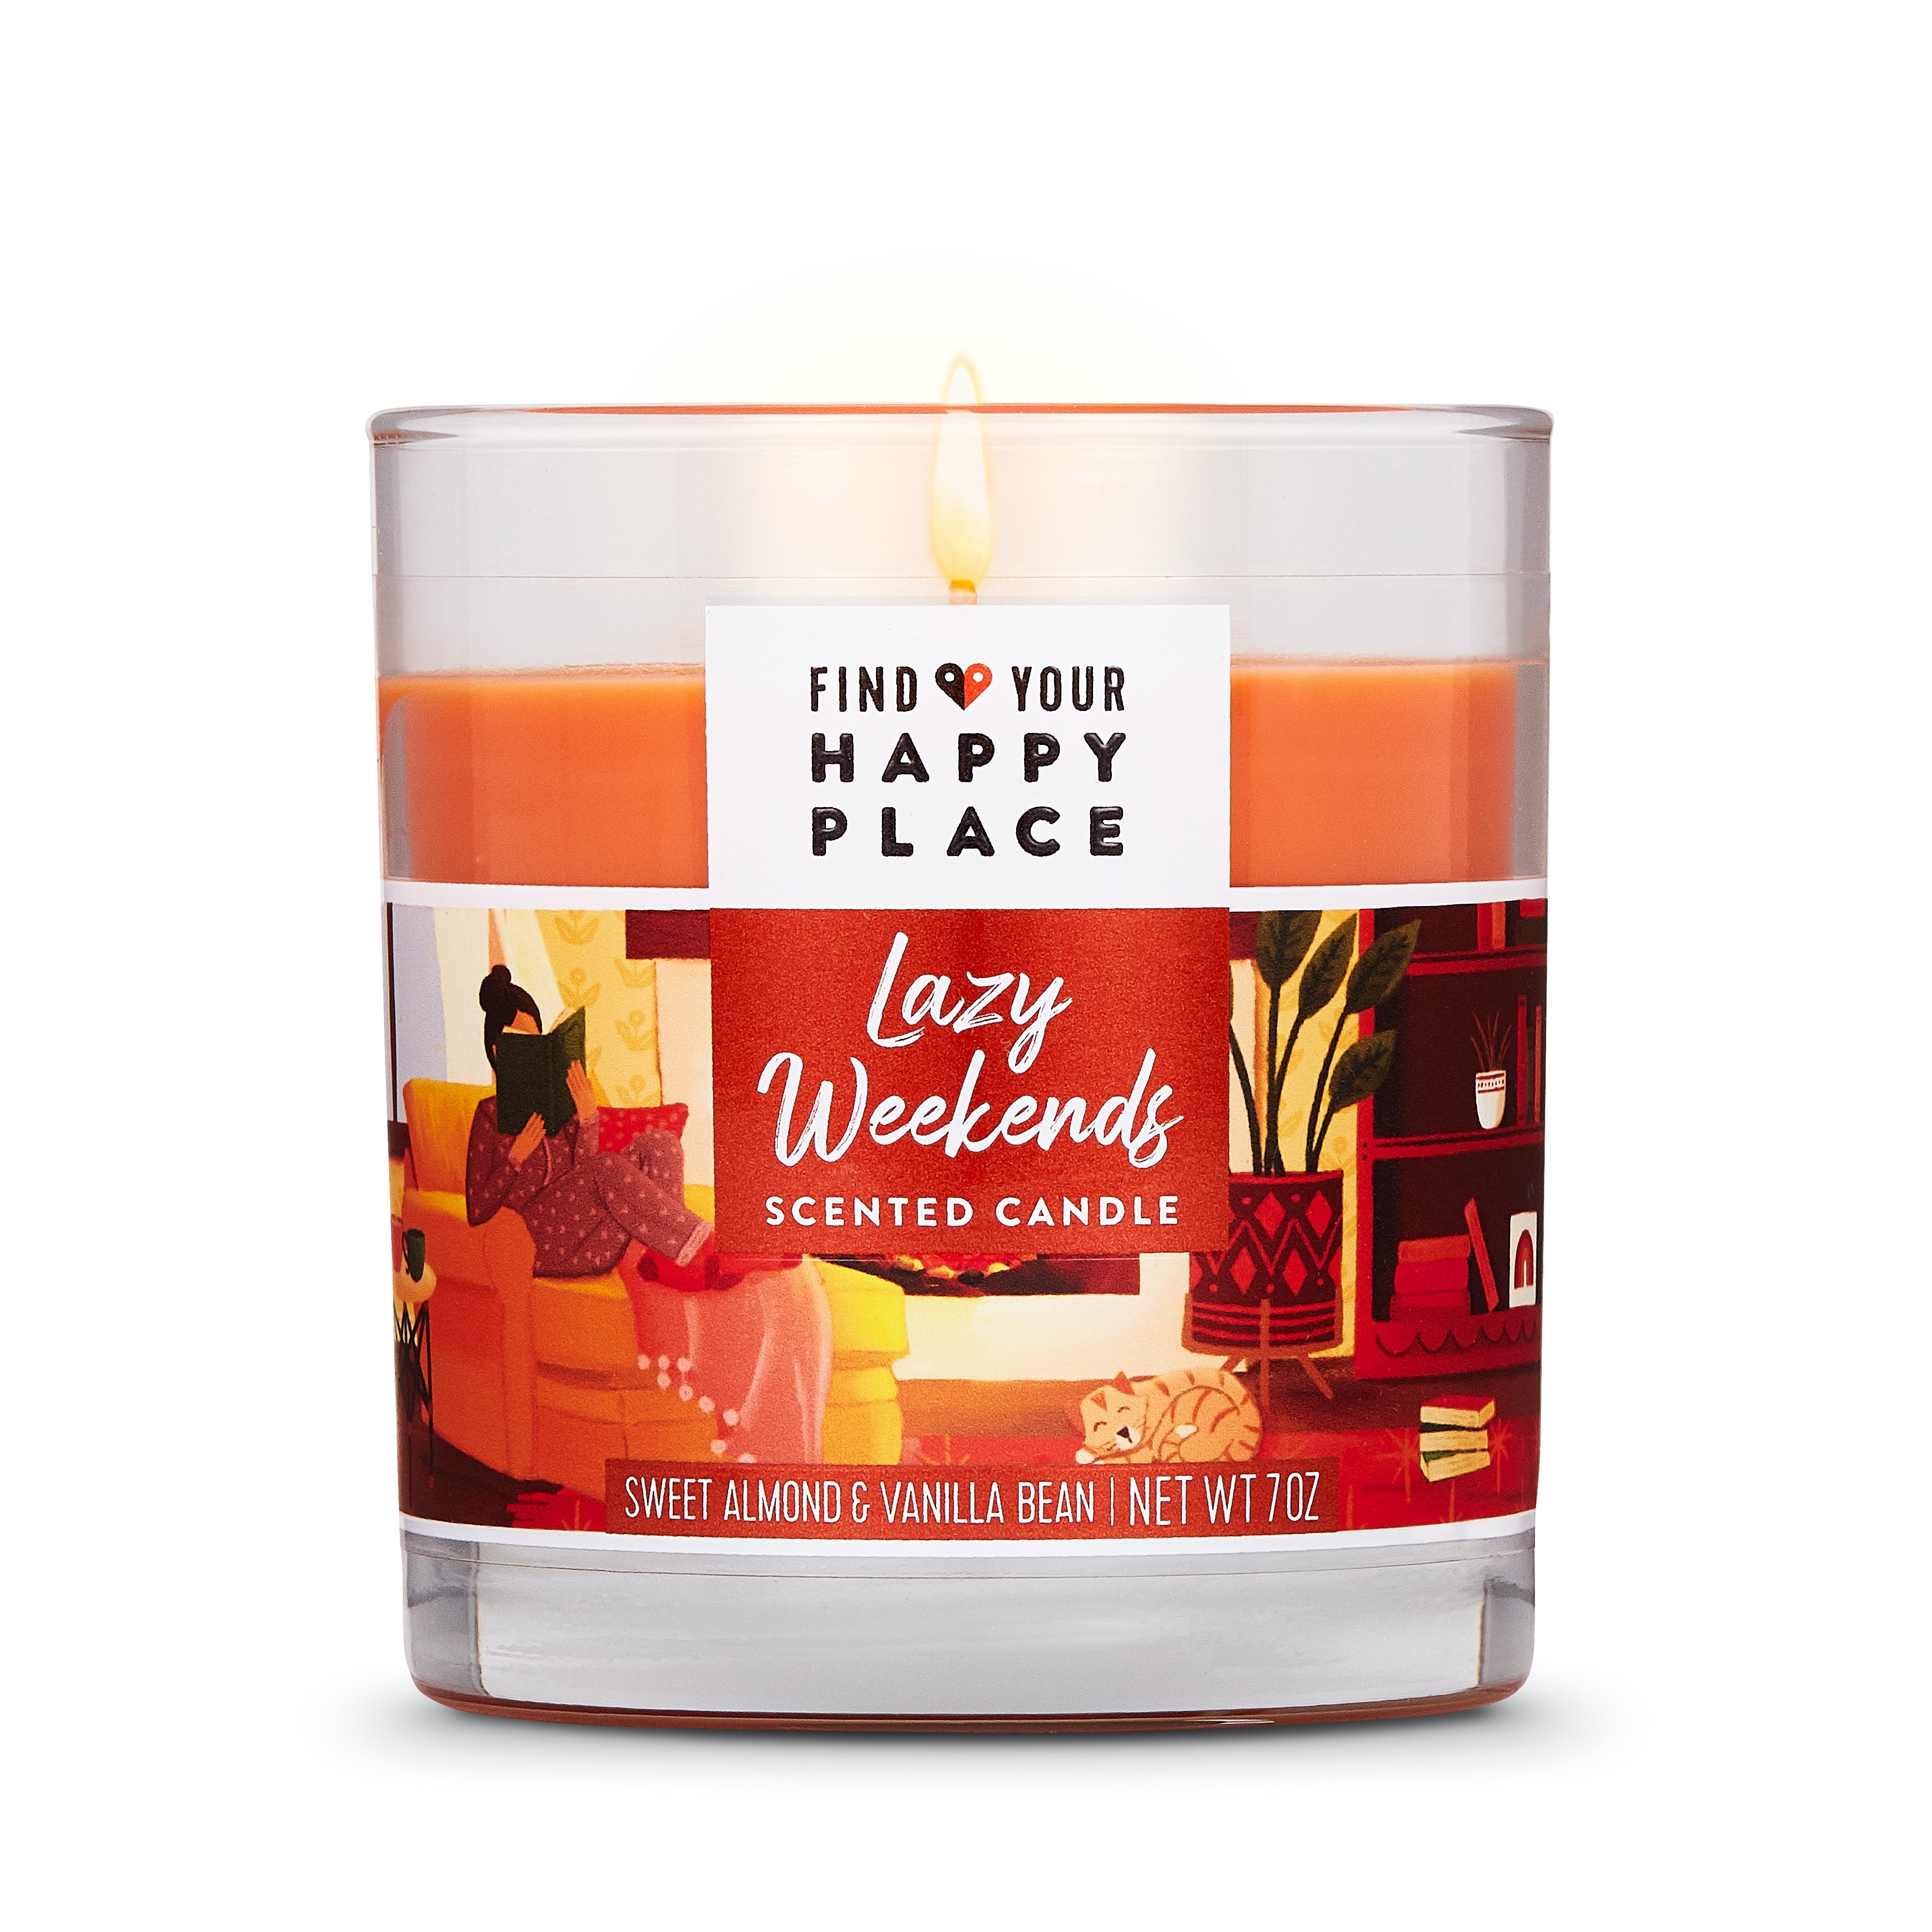 Find Your Happy Place Scented Candle Lazy Weekends 7 oz